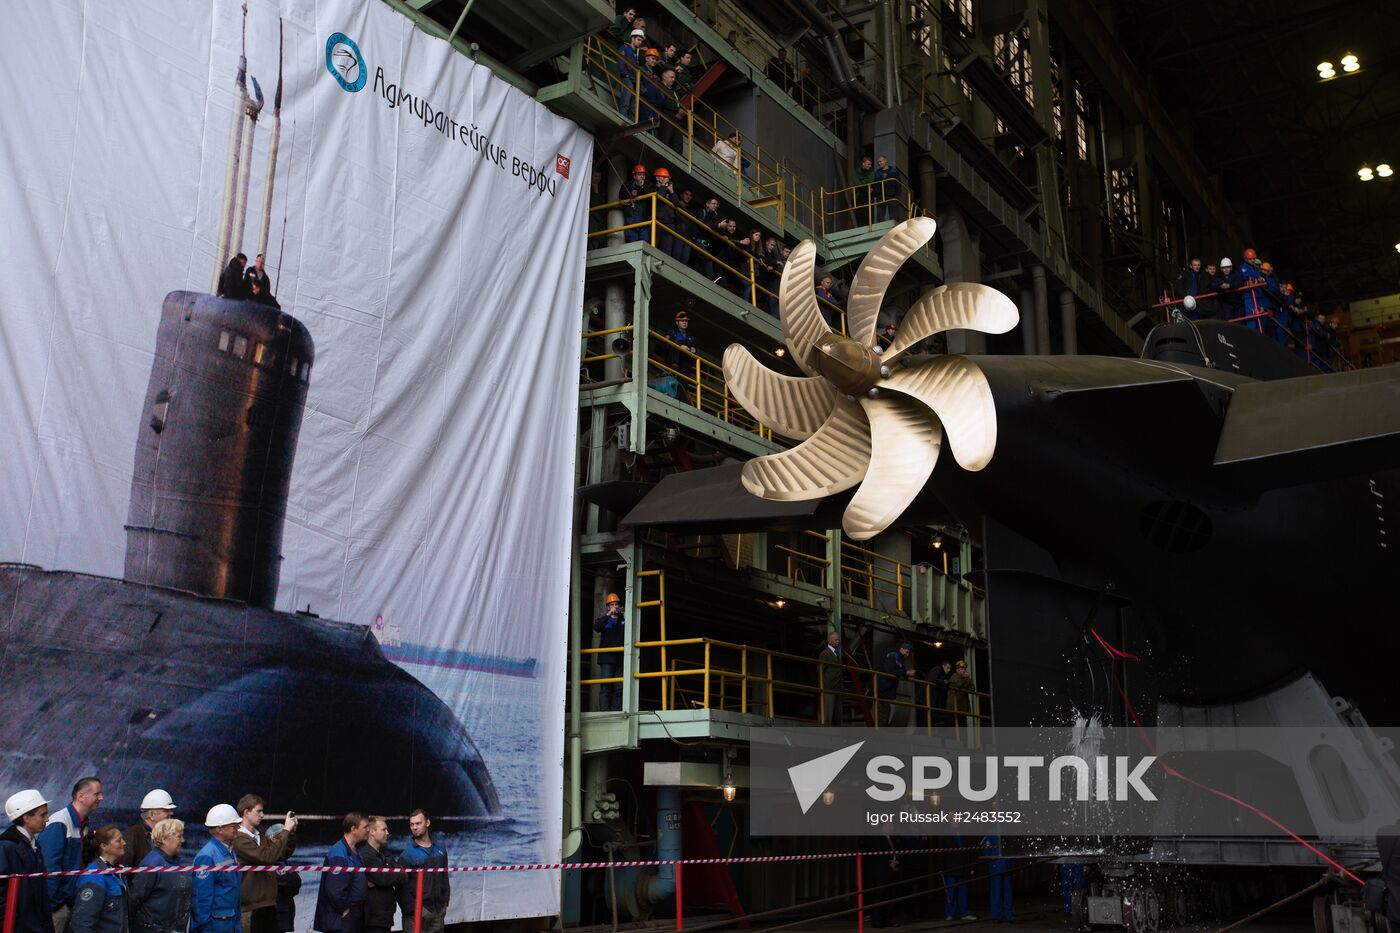 Launching Stary Oskol diesel electric submarine